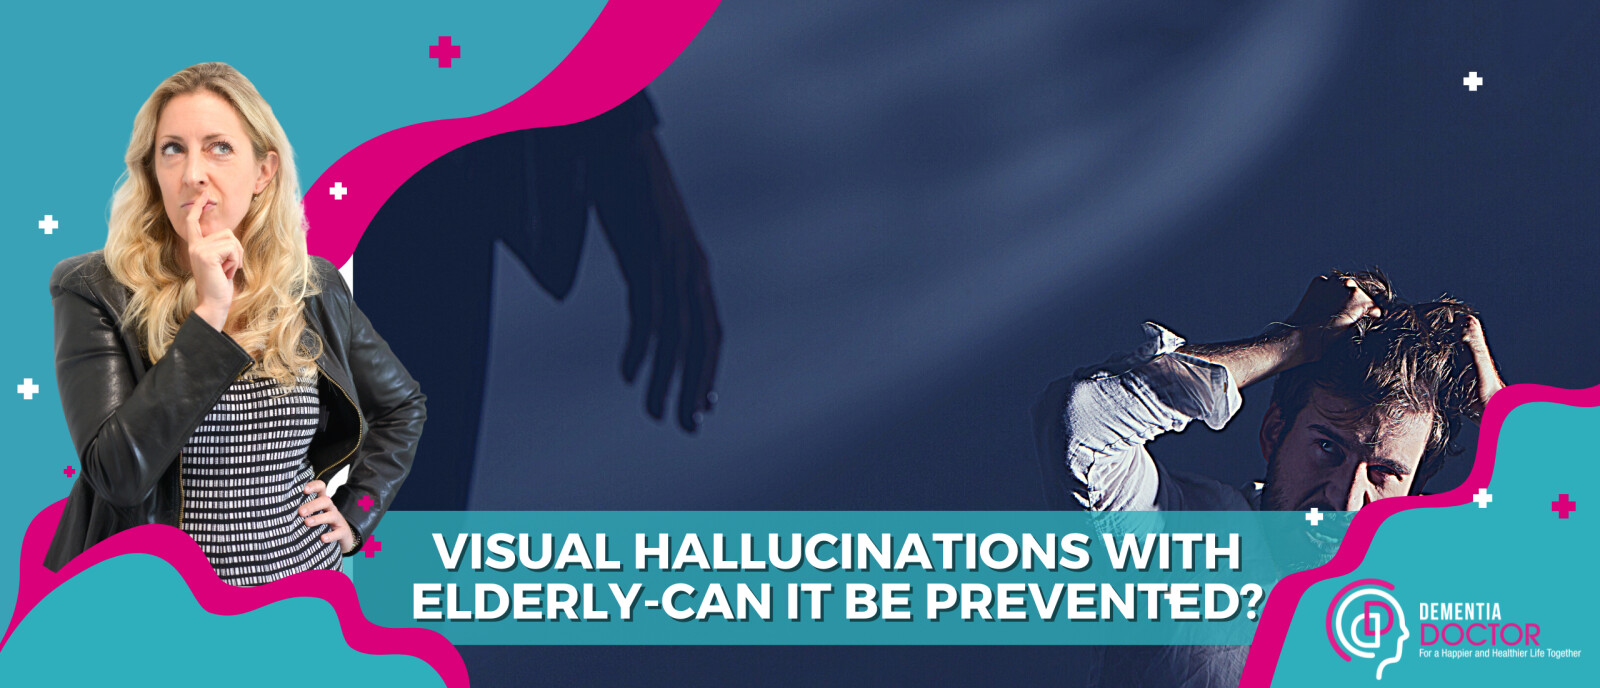 Visual hallucinations with elderly. Can it be prevented?